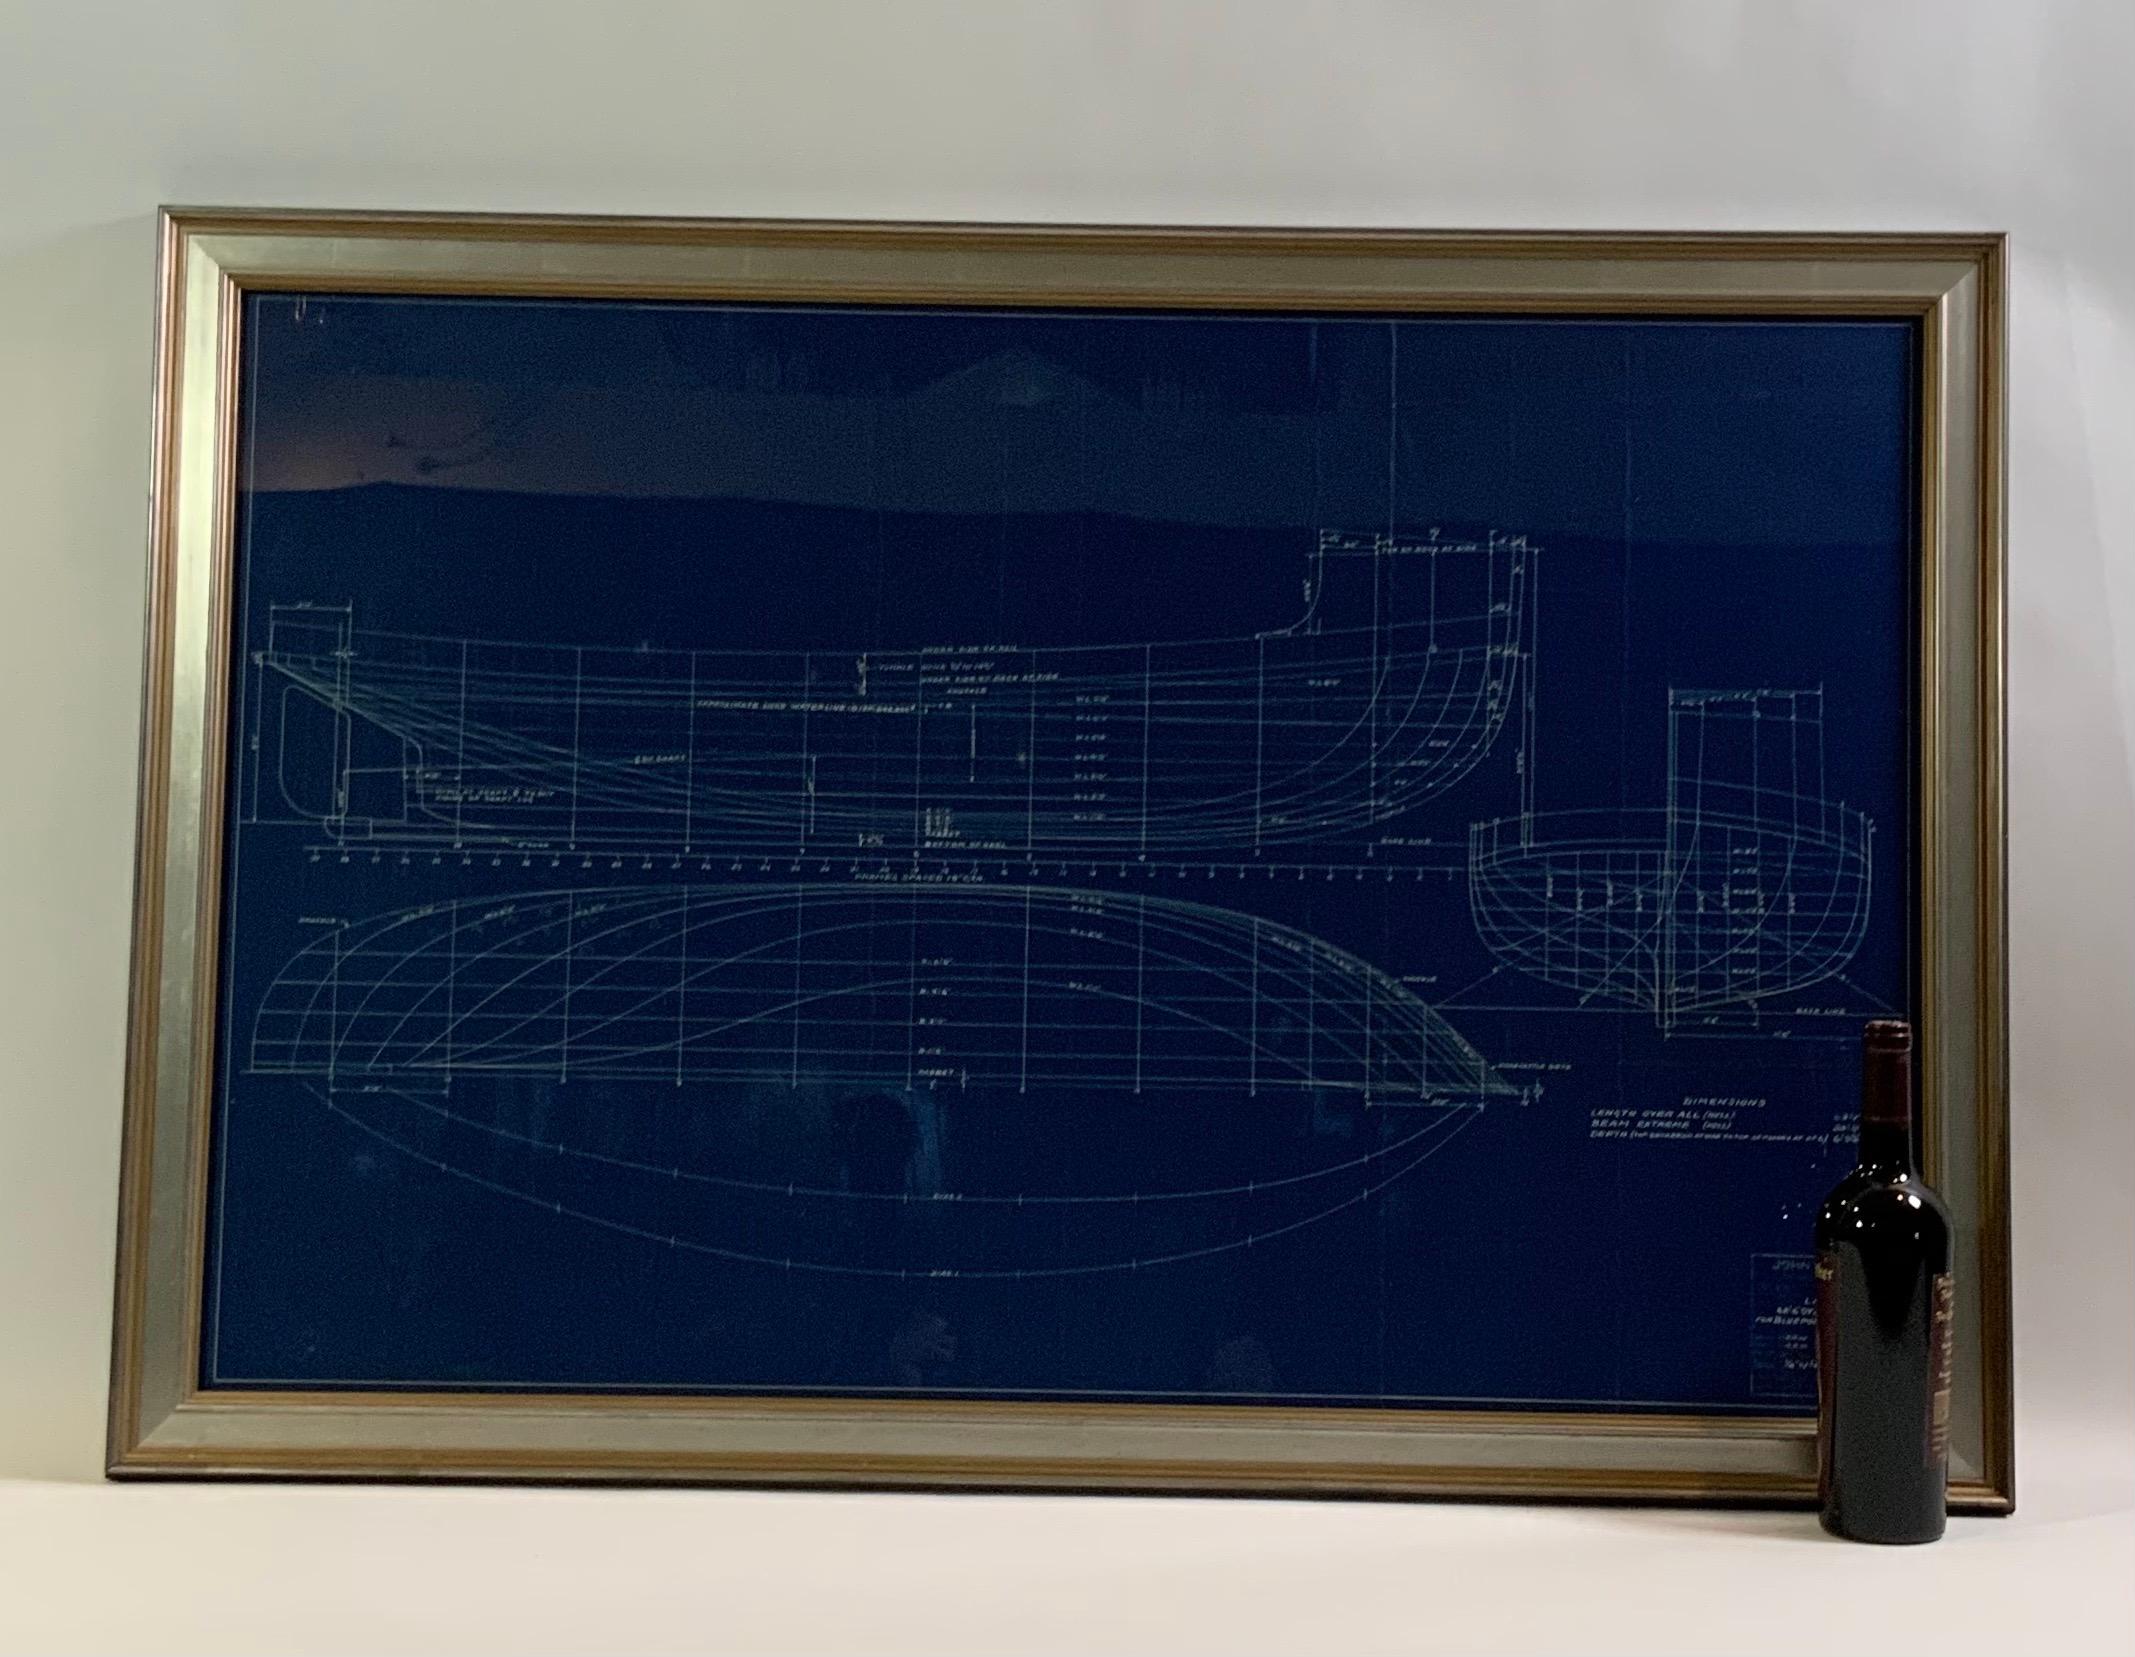 Original blueprint showing the lines drawing for a sixth two foot oyster dredger built for Blueprints Company Incorporated. Plan is by John G Alden Naval Architects and is one half inch equals one foot scale. Plan shows all hull lines in great